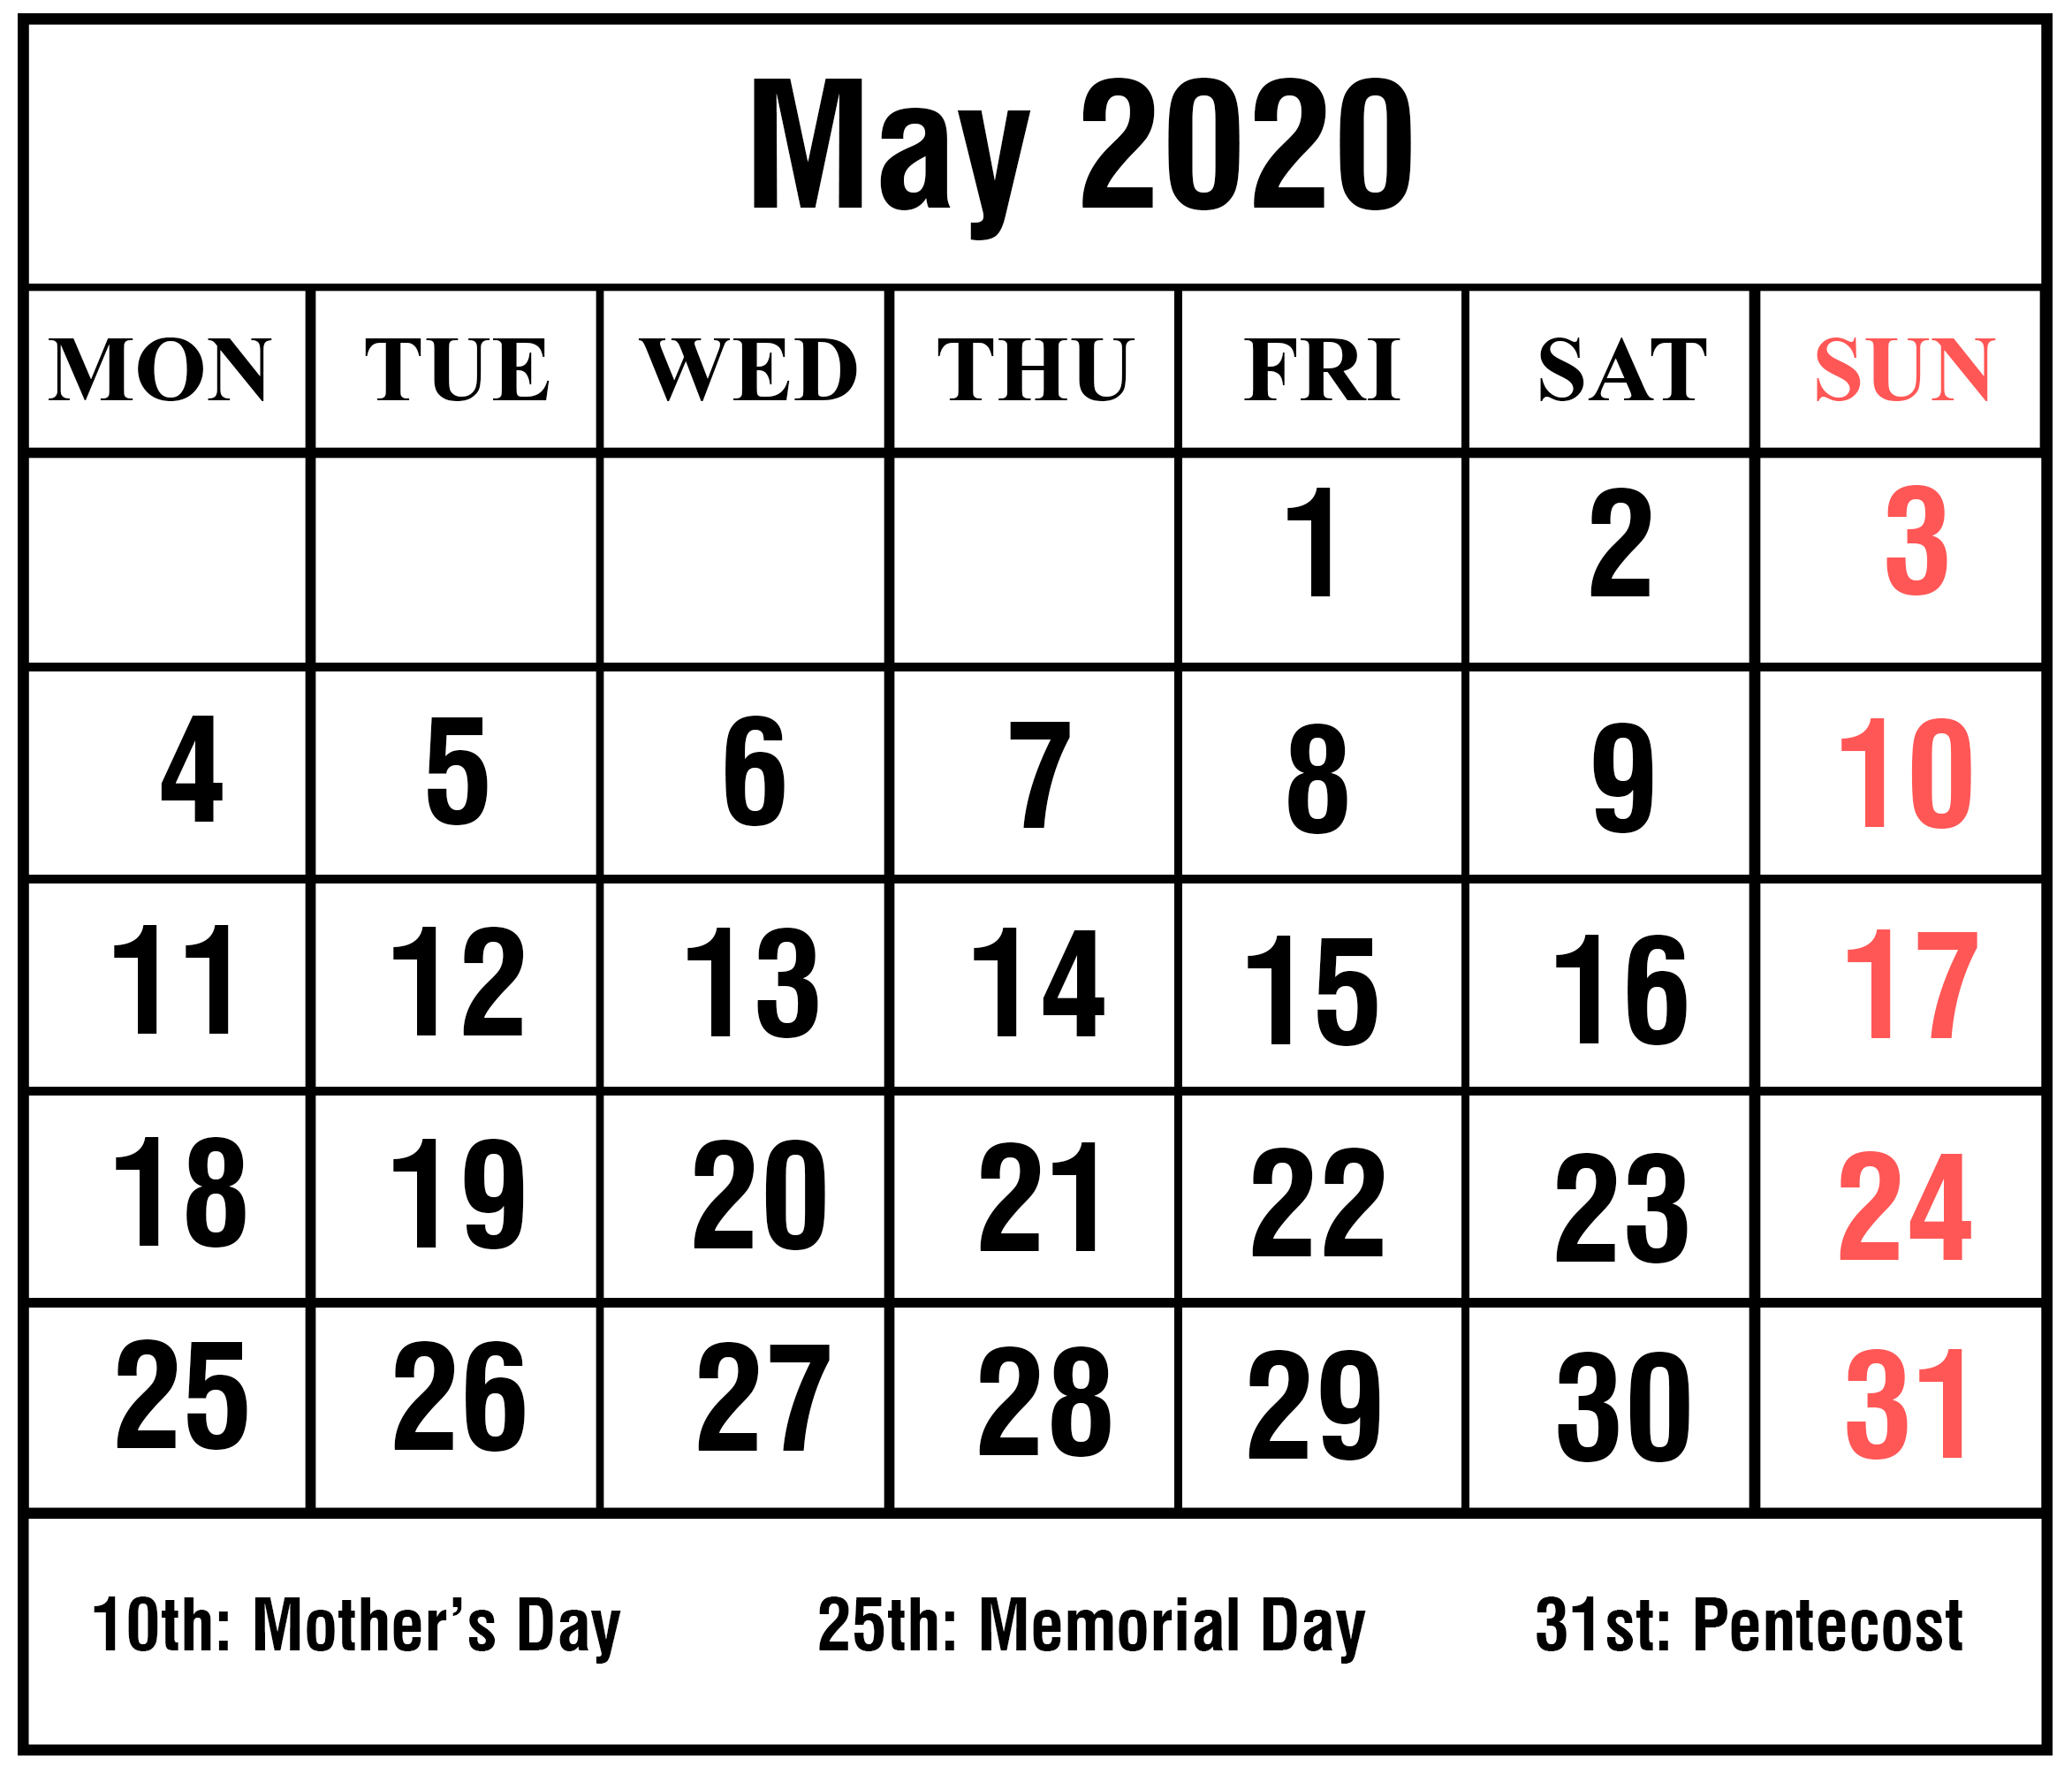 Blank May Calendar 2020 Printable Template | Printable intended for Free Printable 5 Day Monthly Calendar 2020